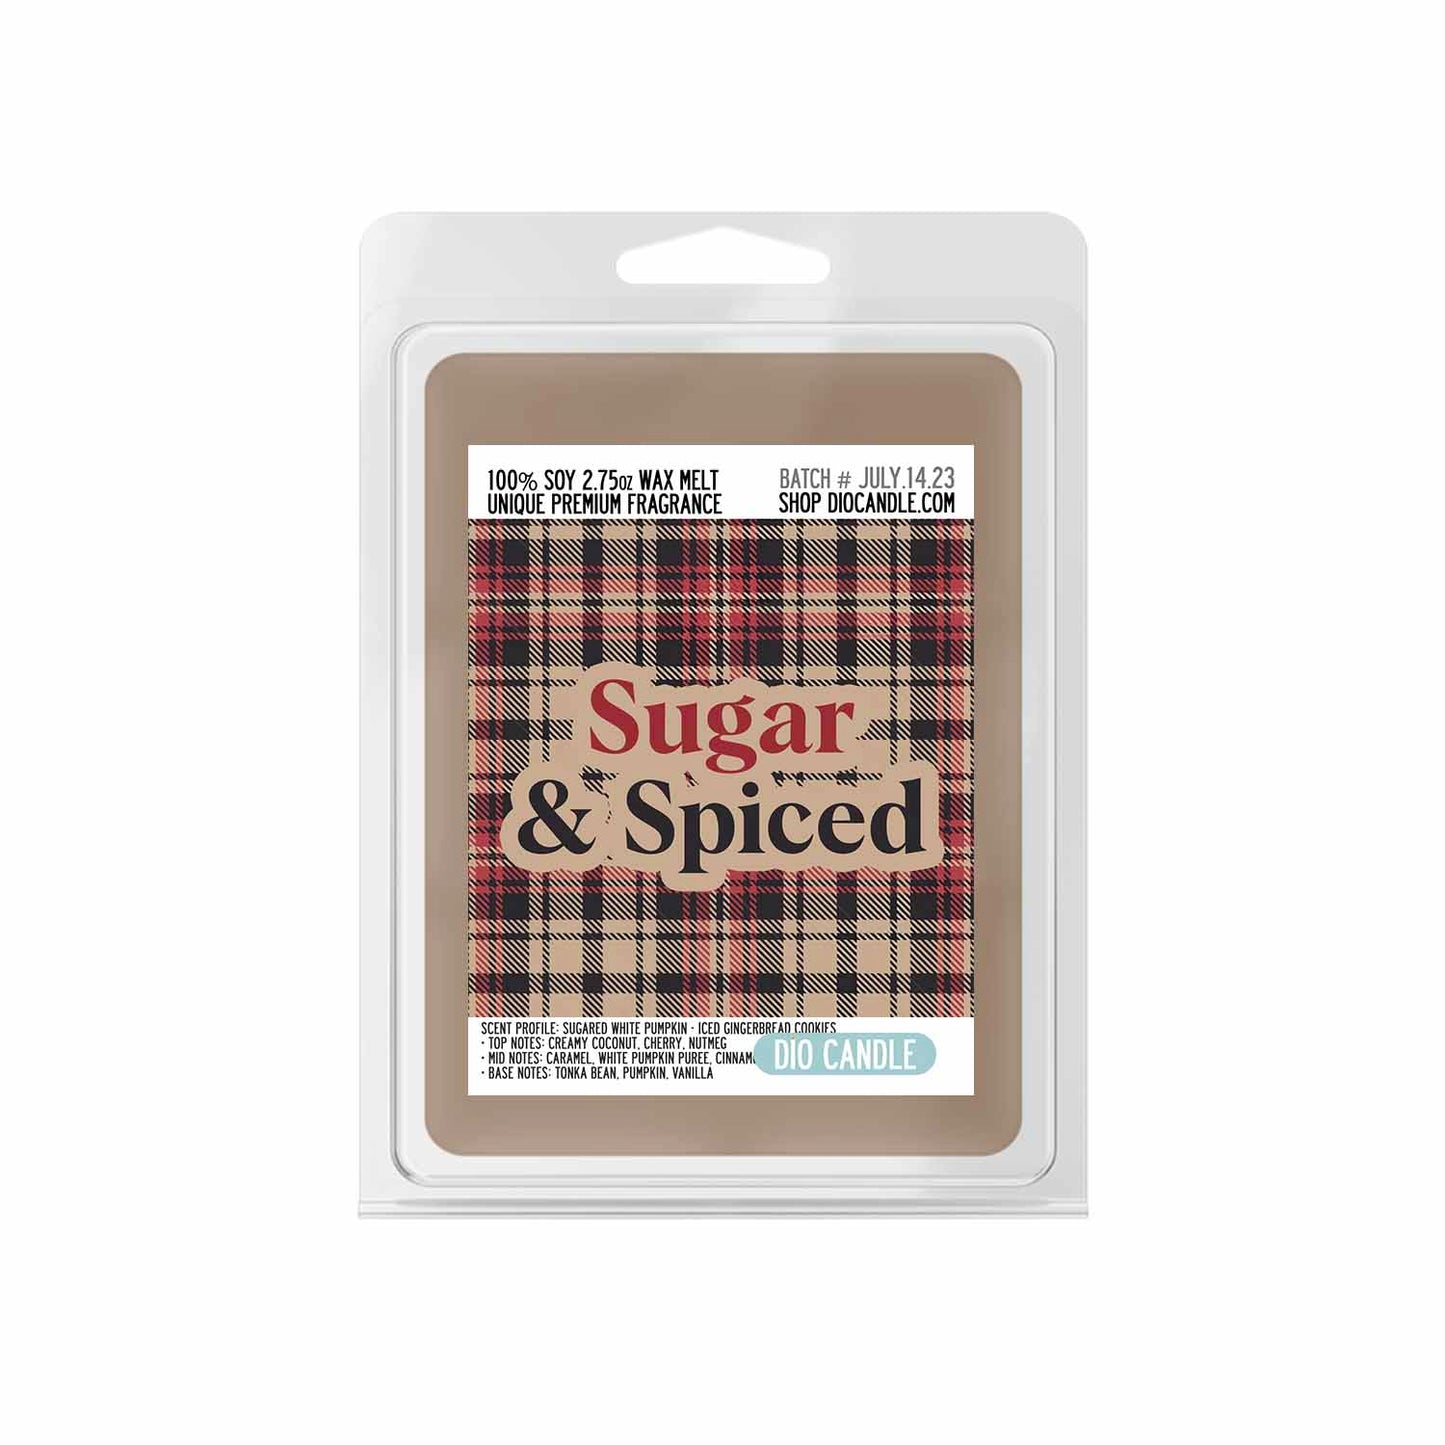 Sugar and Spiced Candle